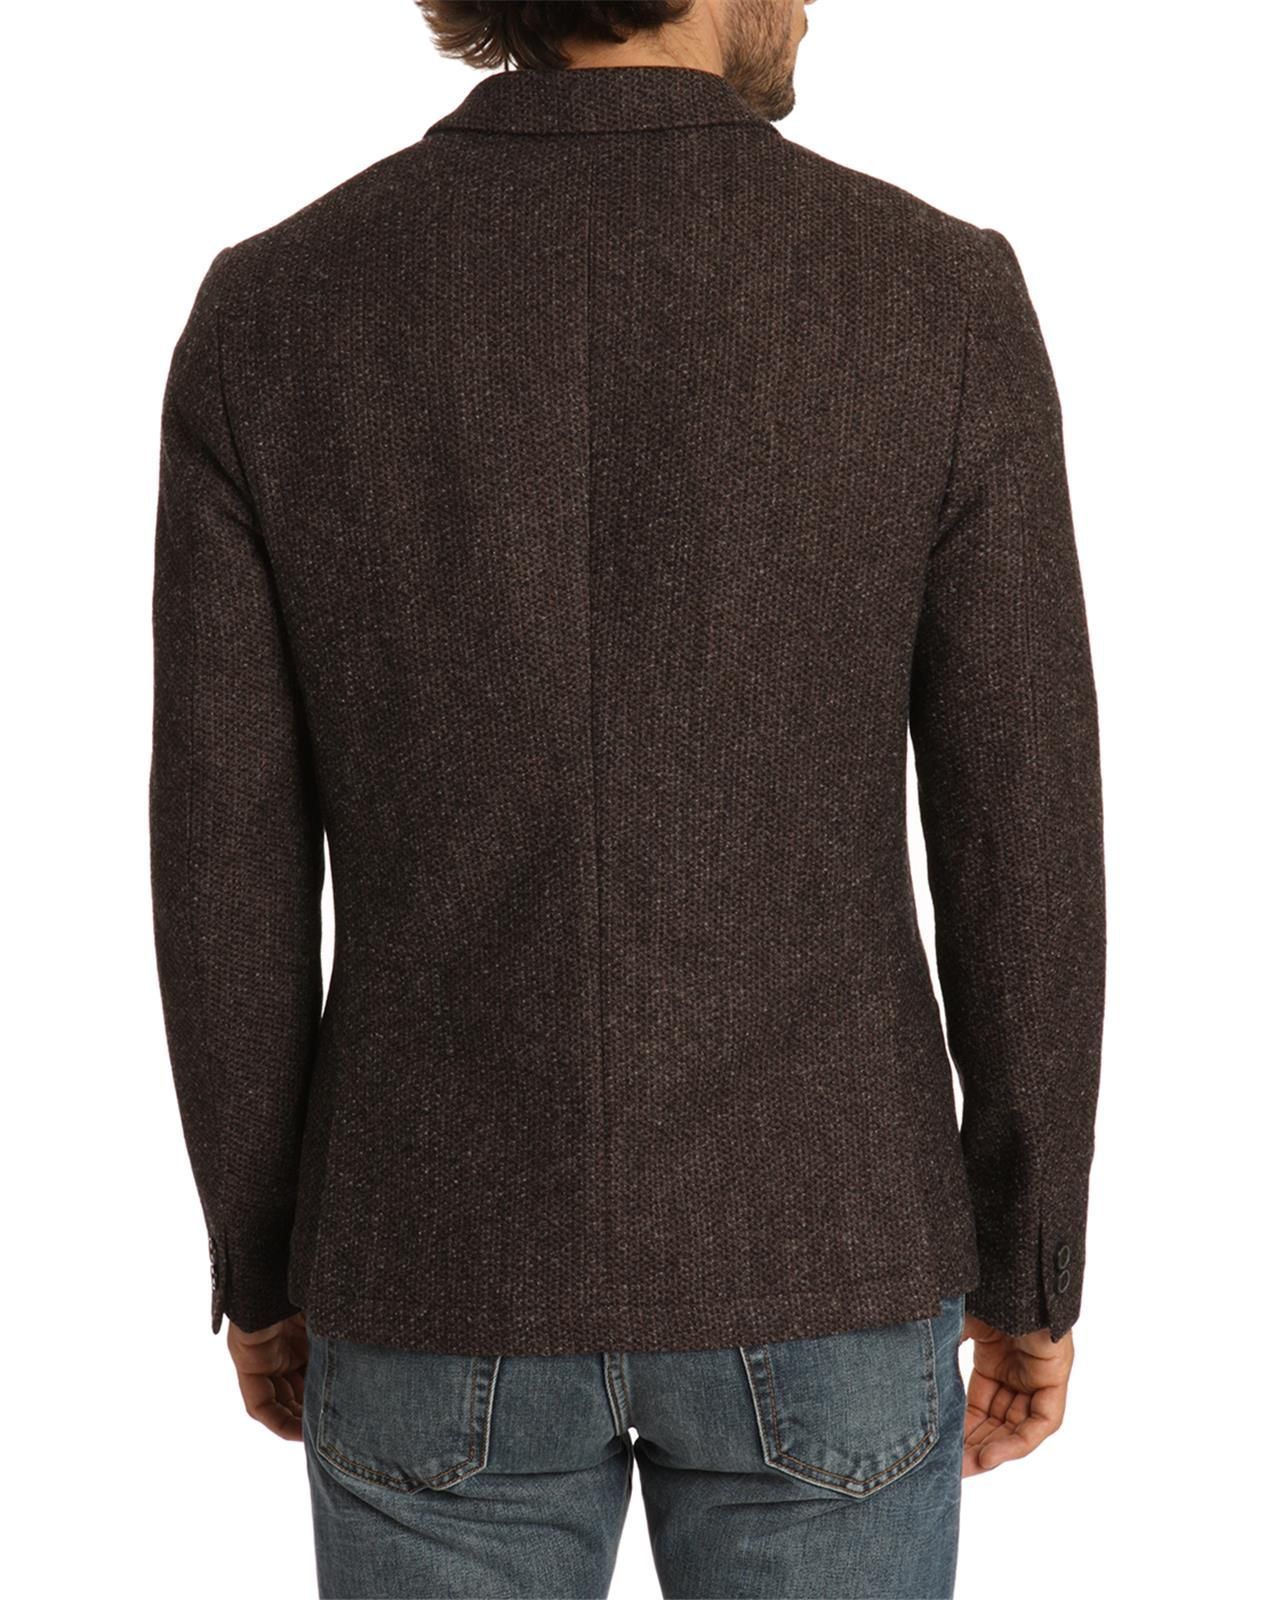 paul-smith-jeans-gray-charcoal-2-button-tweed-jacket-product-1-17171629-2-566343450-normal.jpeg